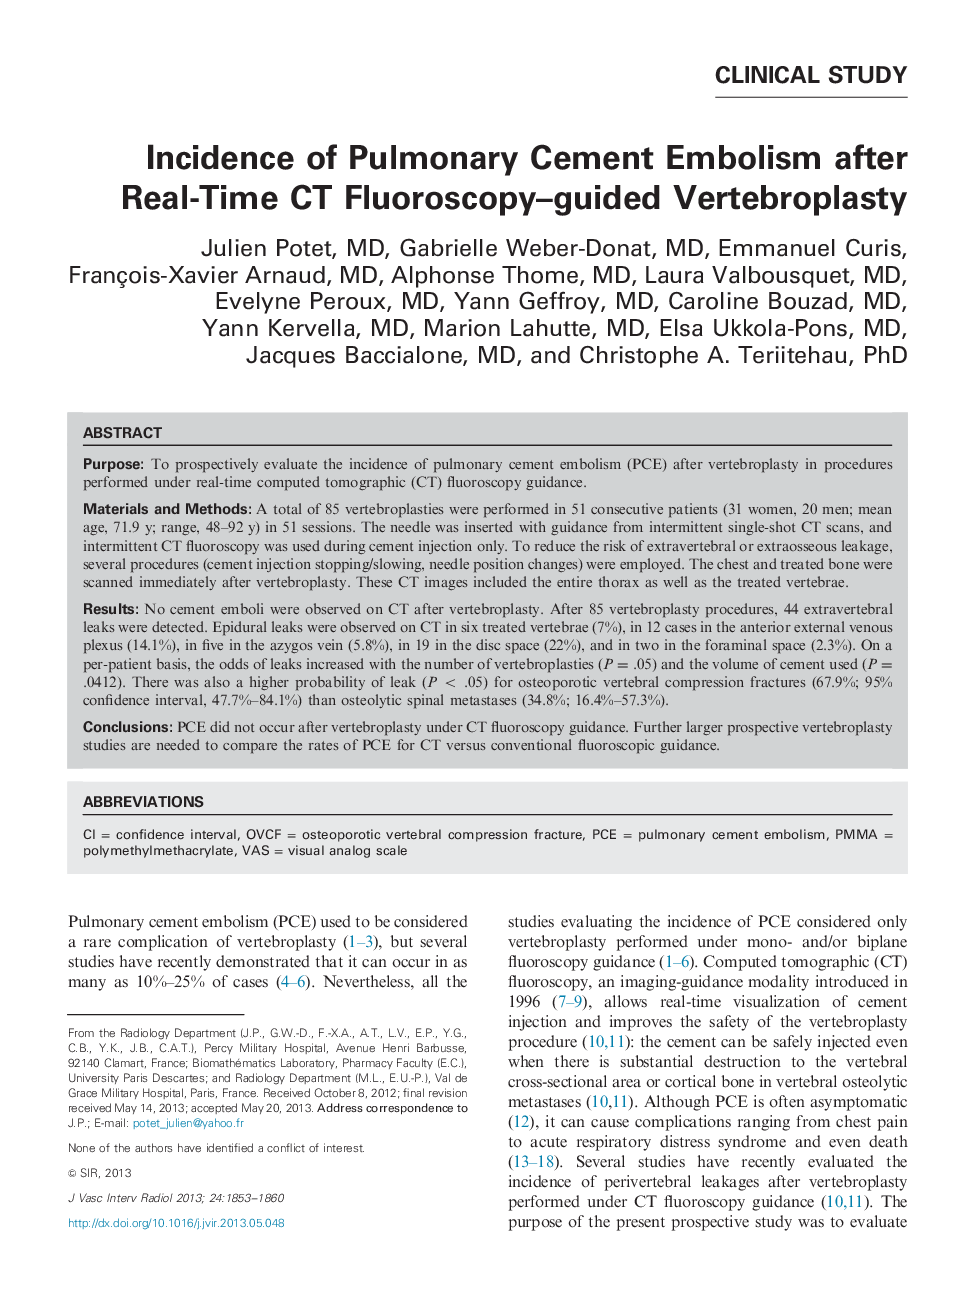 Incidence of Pulmonary Cement Embolism after Real-Time CT Fluoroscopy-guided Vertebroplasty